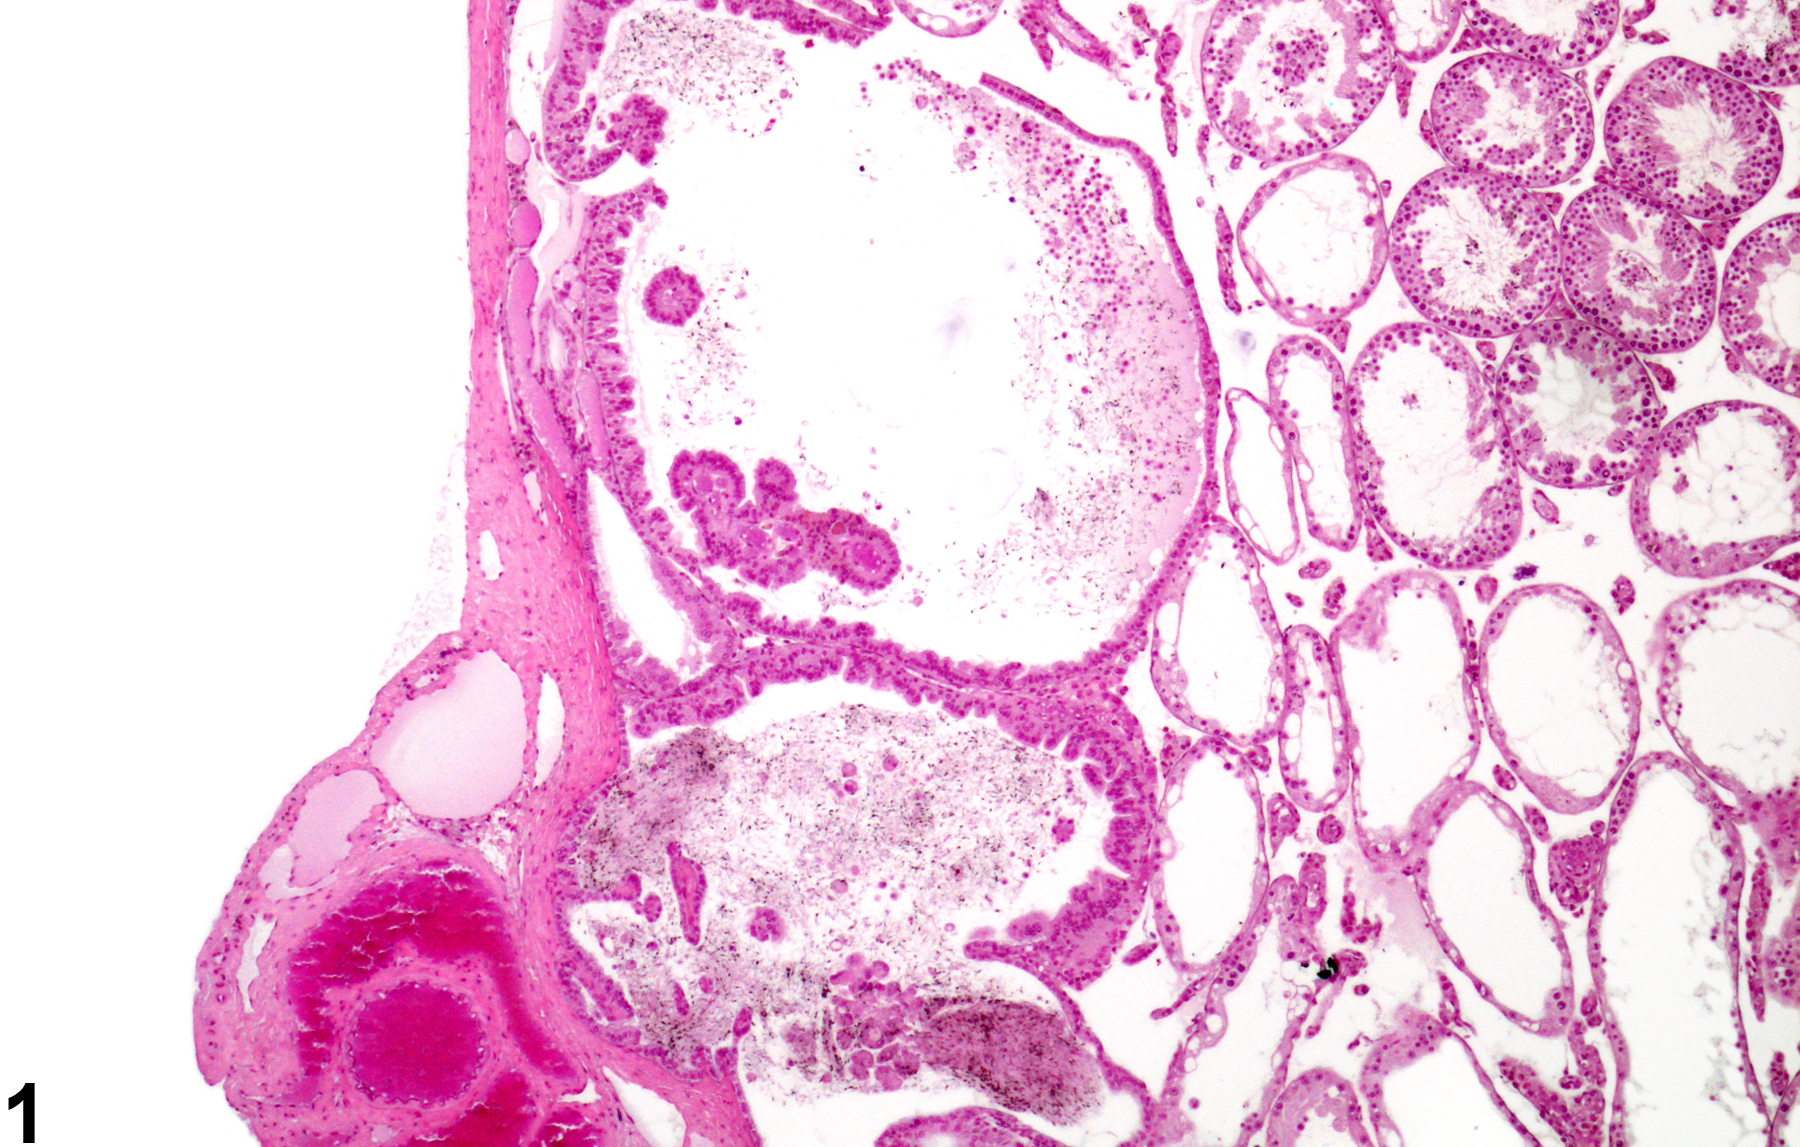 Image of rete testis hyperplasia in the testis from a male CD-1 mouse